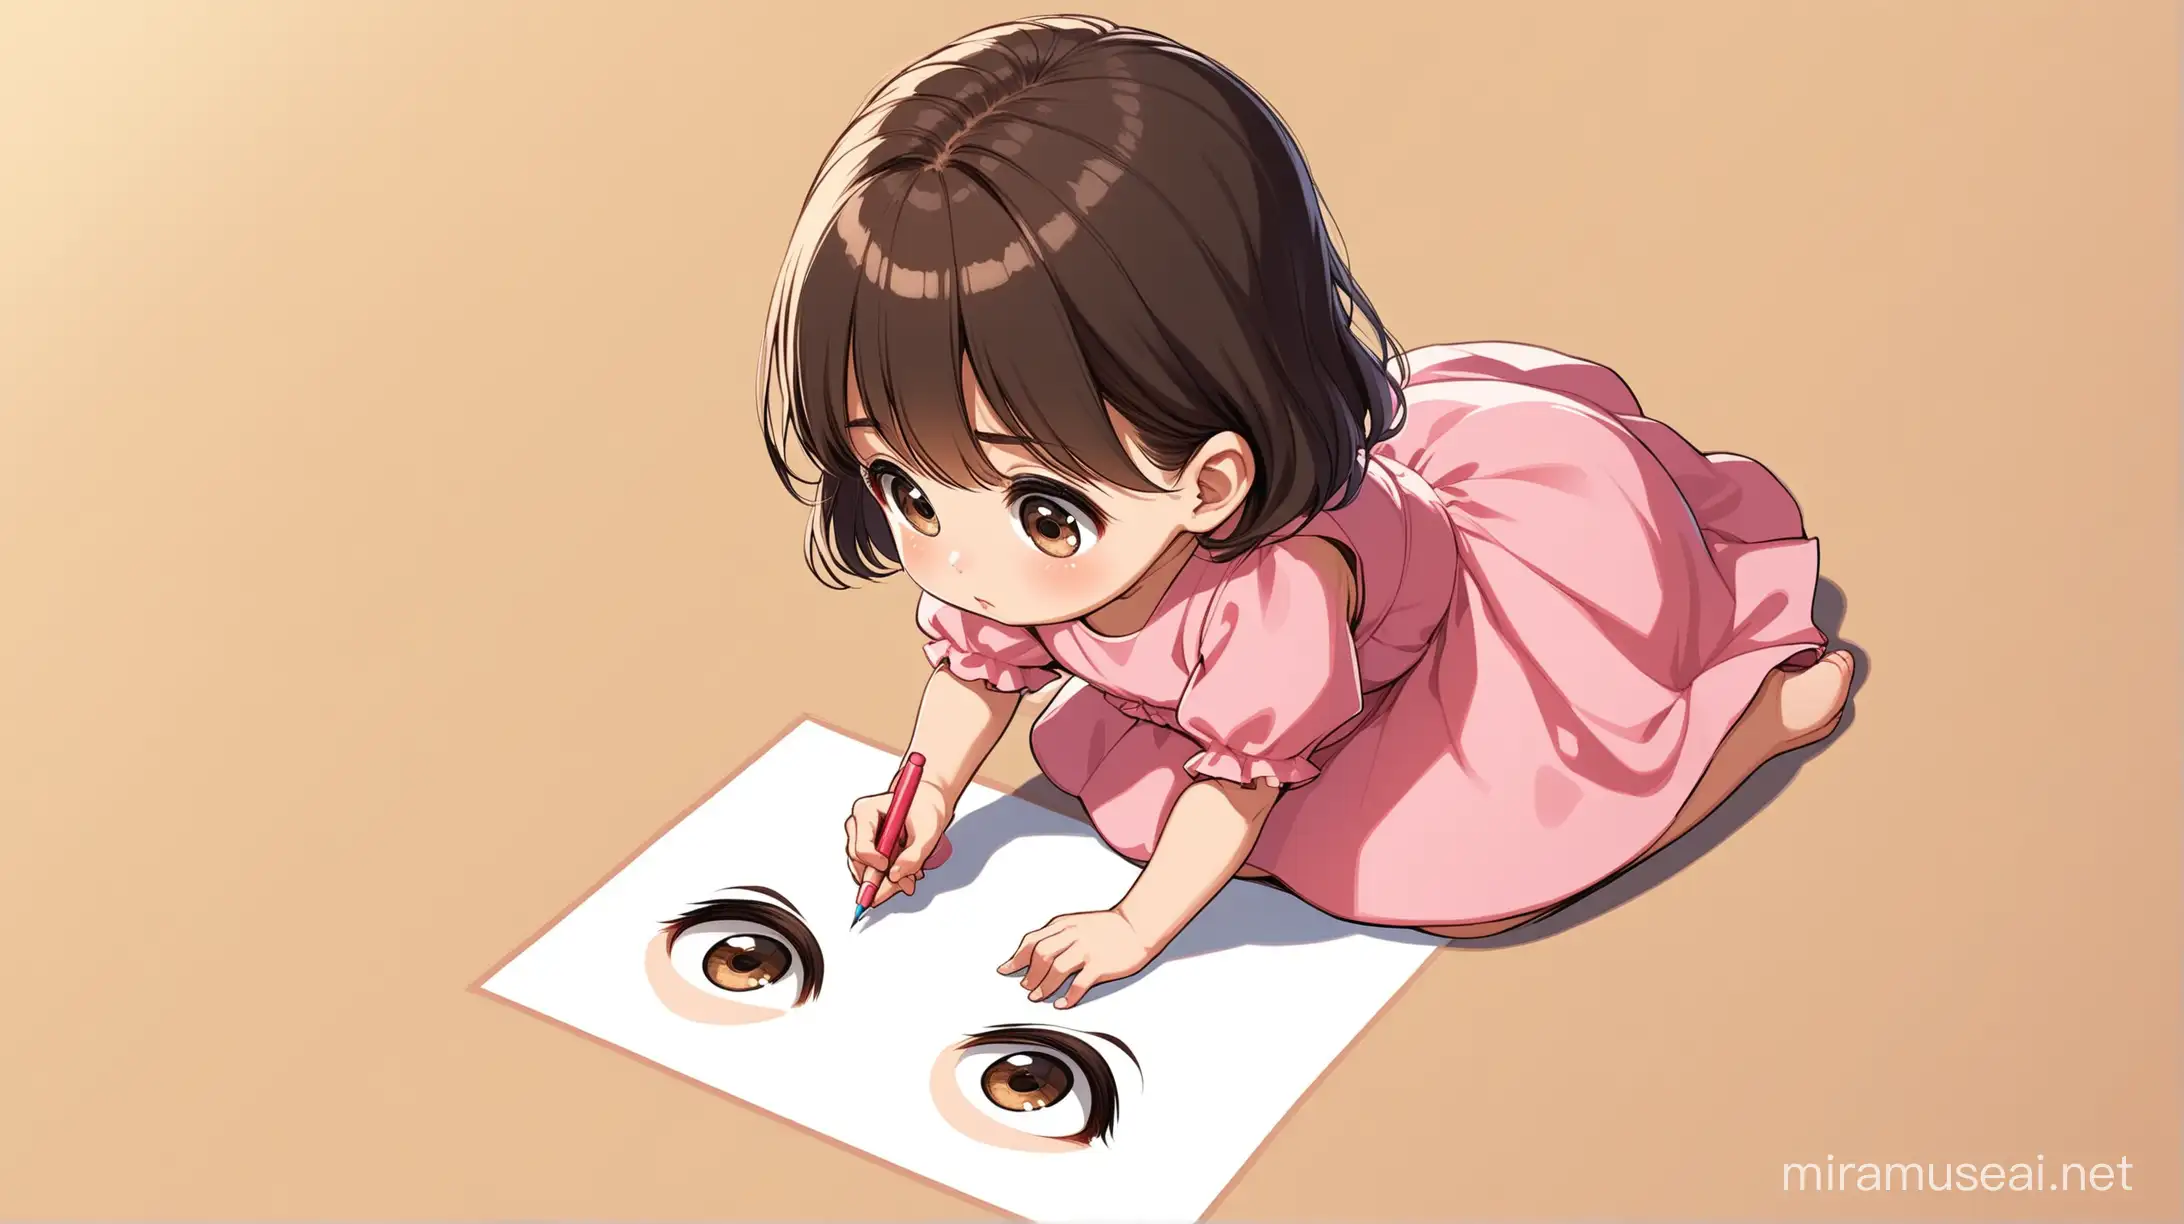 A female kid have a 3 years old , sitting on the floor and drawing on the floor while looking down into the floor, light skin, dark brown big eyes, dark brown hair, pink dress, cartoon type

